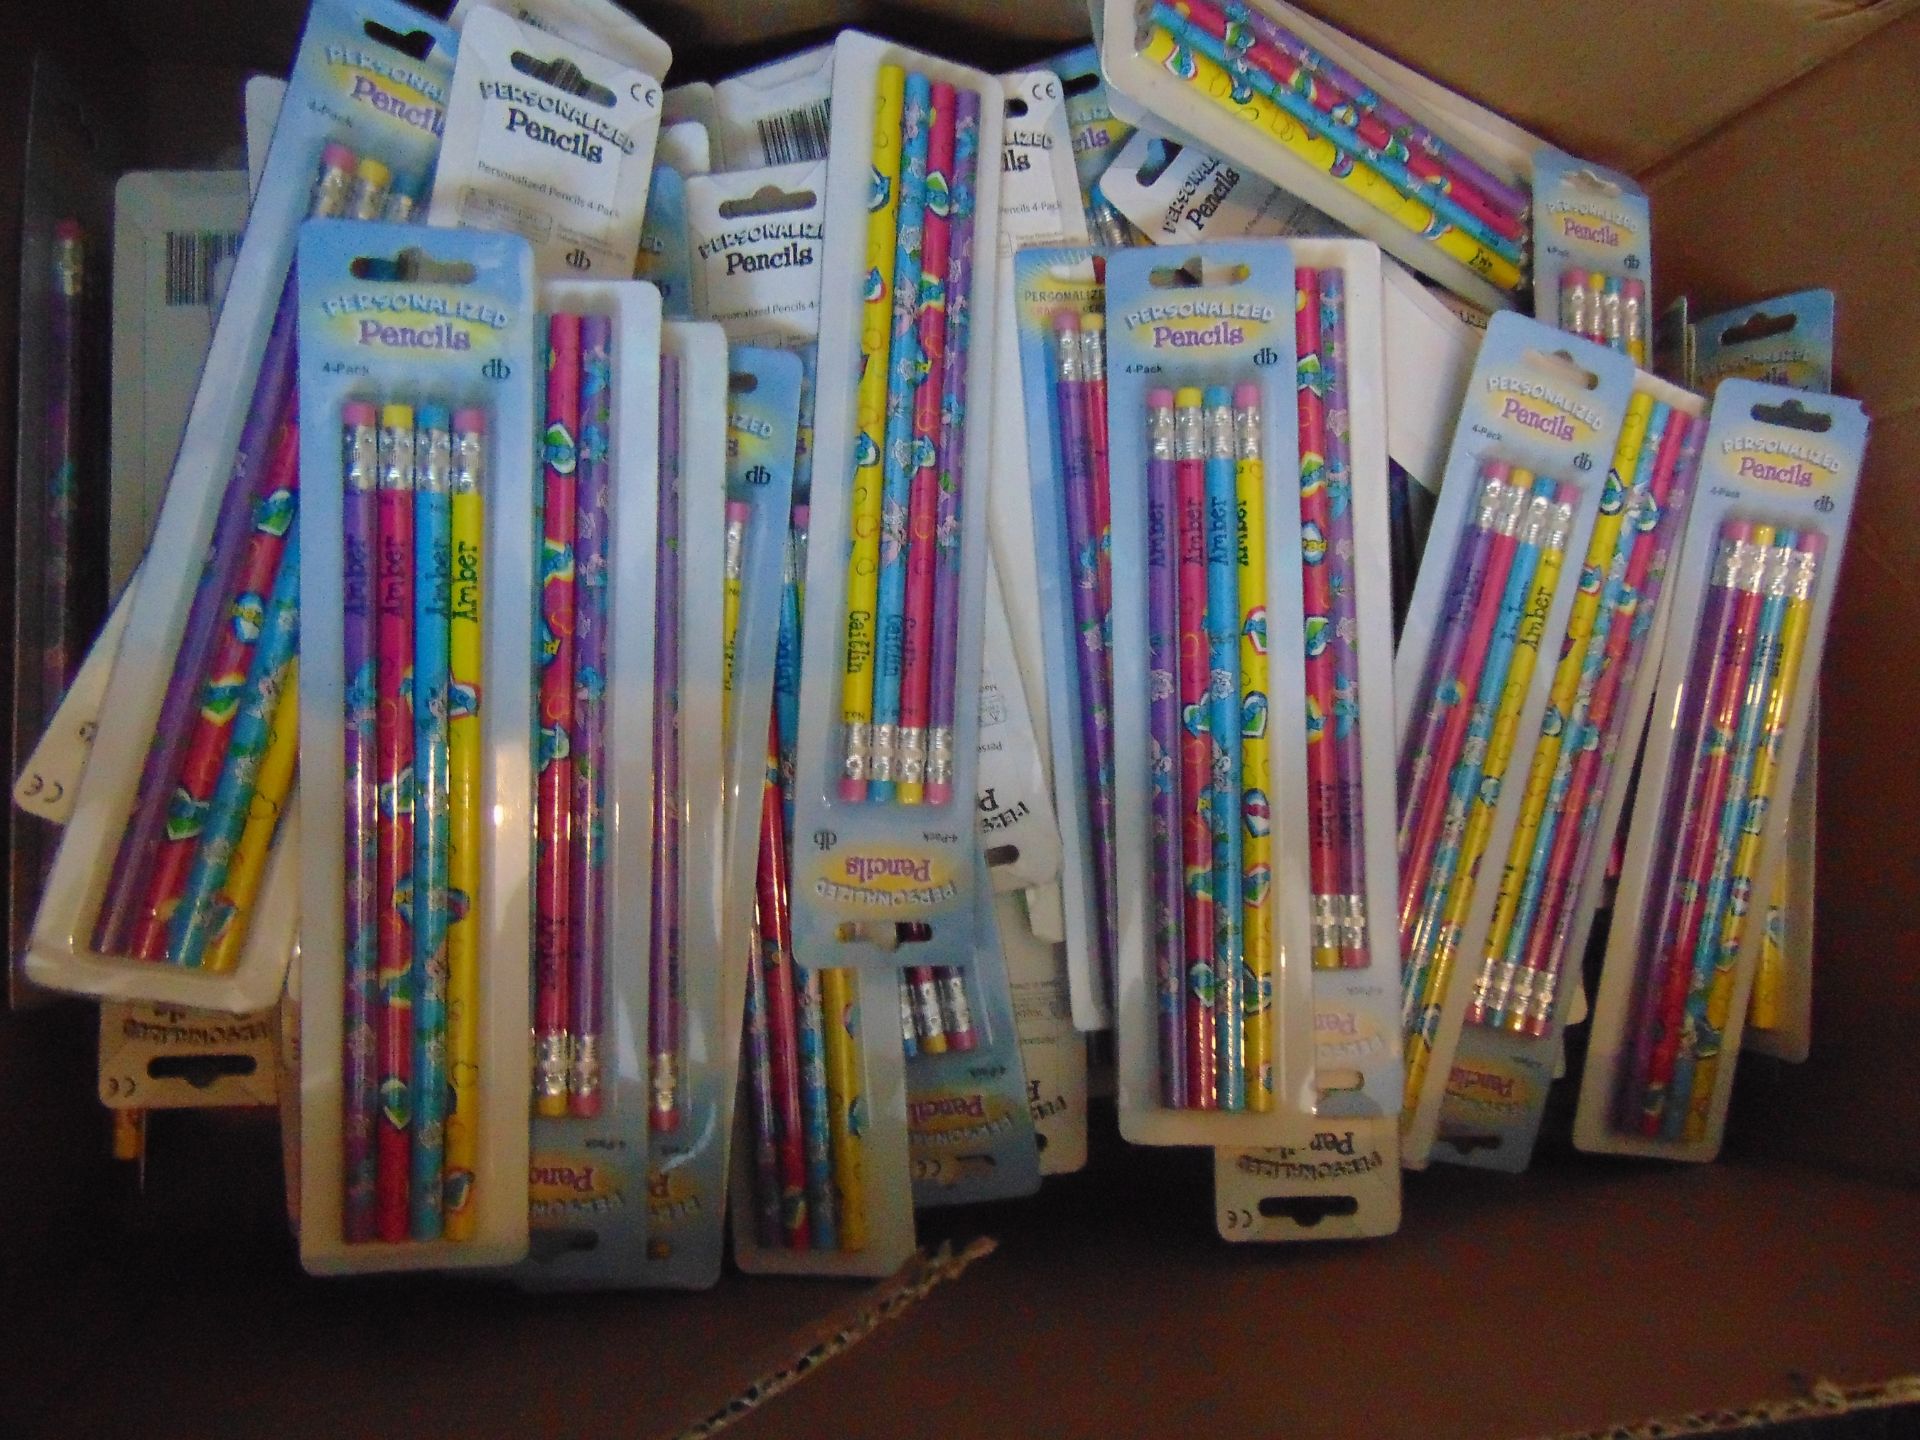 100 X 4 Packs Of Pencils Total 400 Pencils, These Are Personalised With Names, But Are Easily Remove